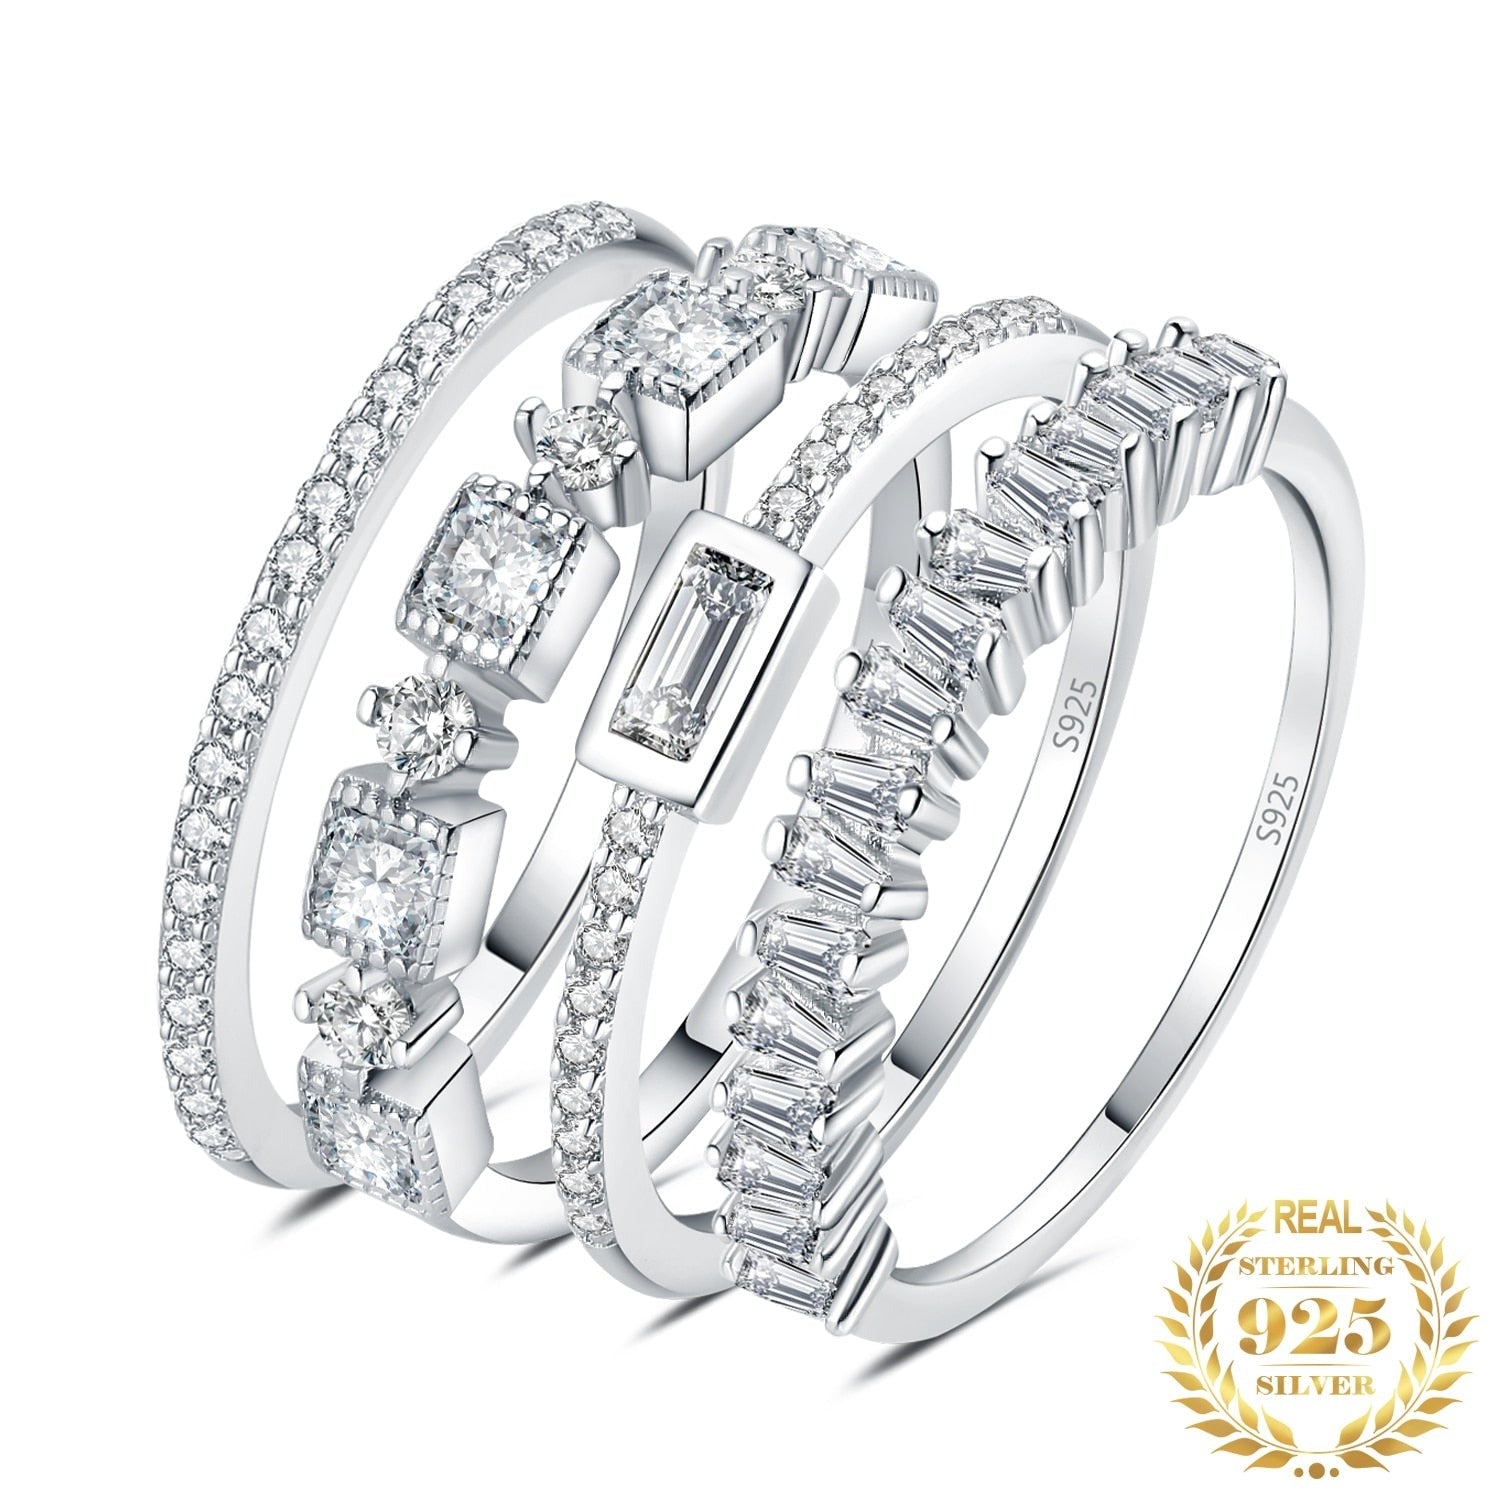 4 Pcs 925 Sterling Silver Band Solitaire Eternity Stacking Rings